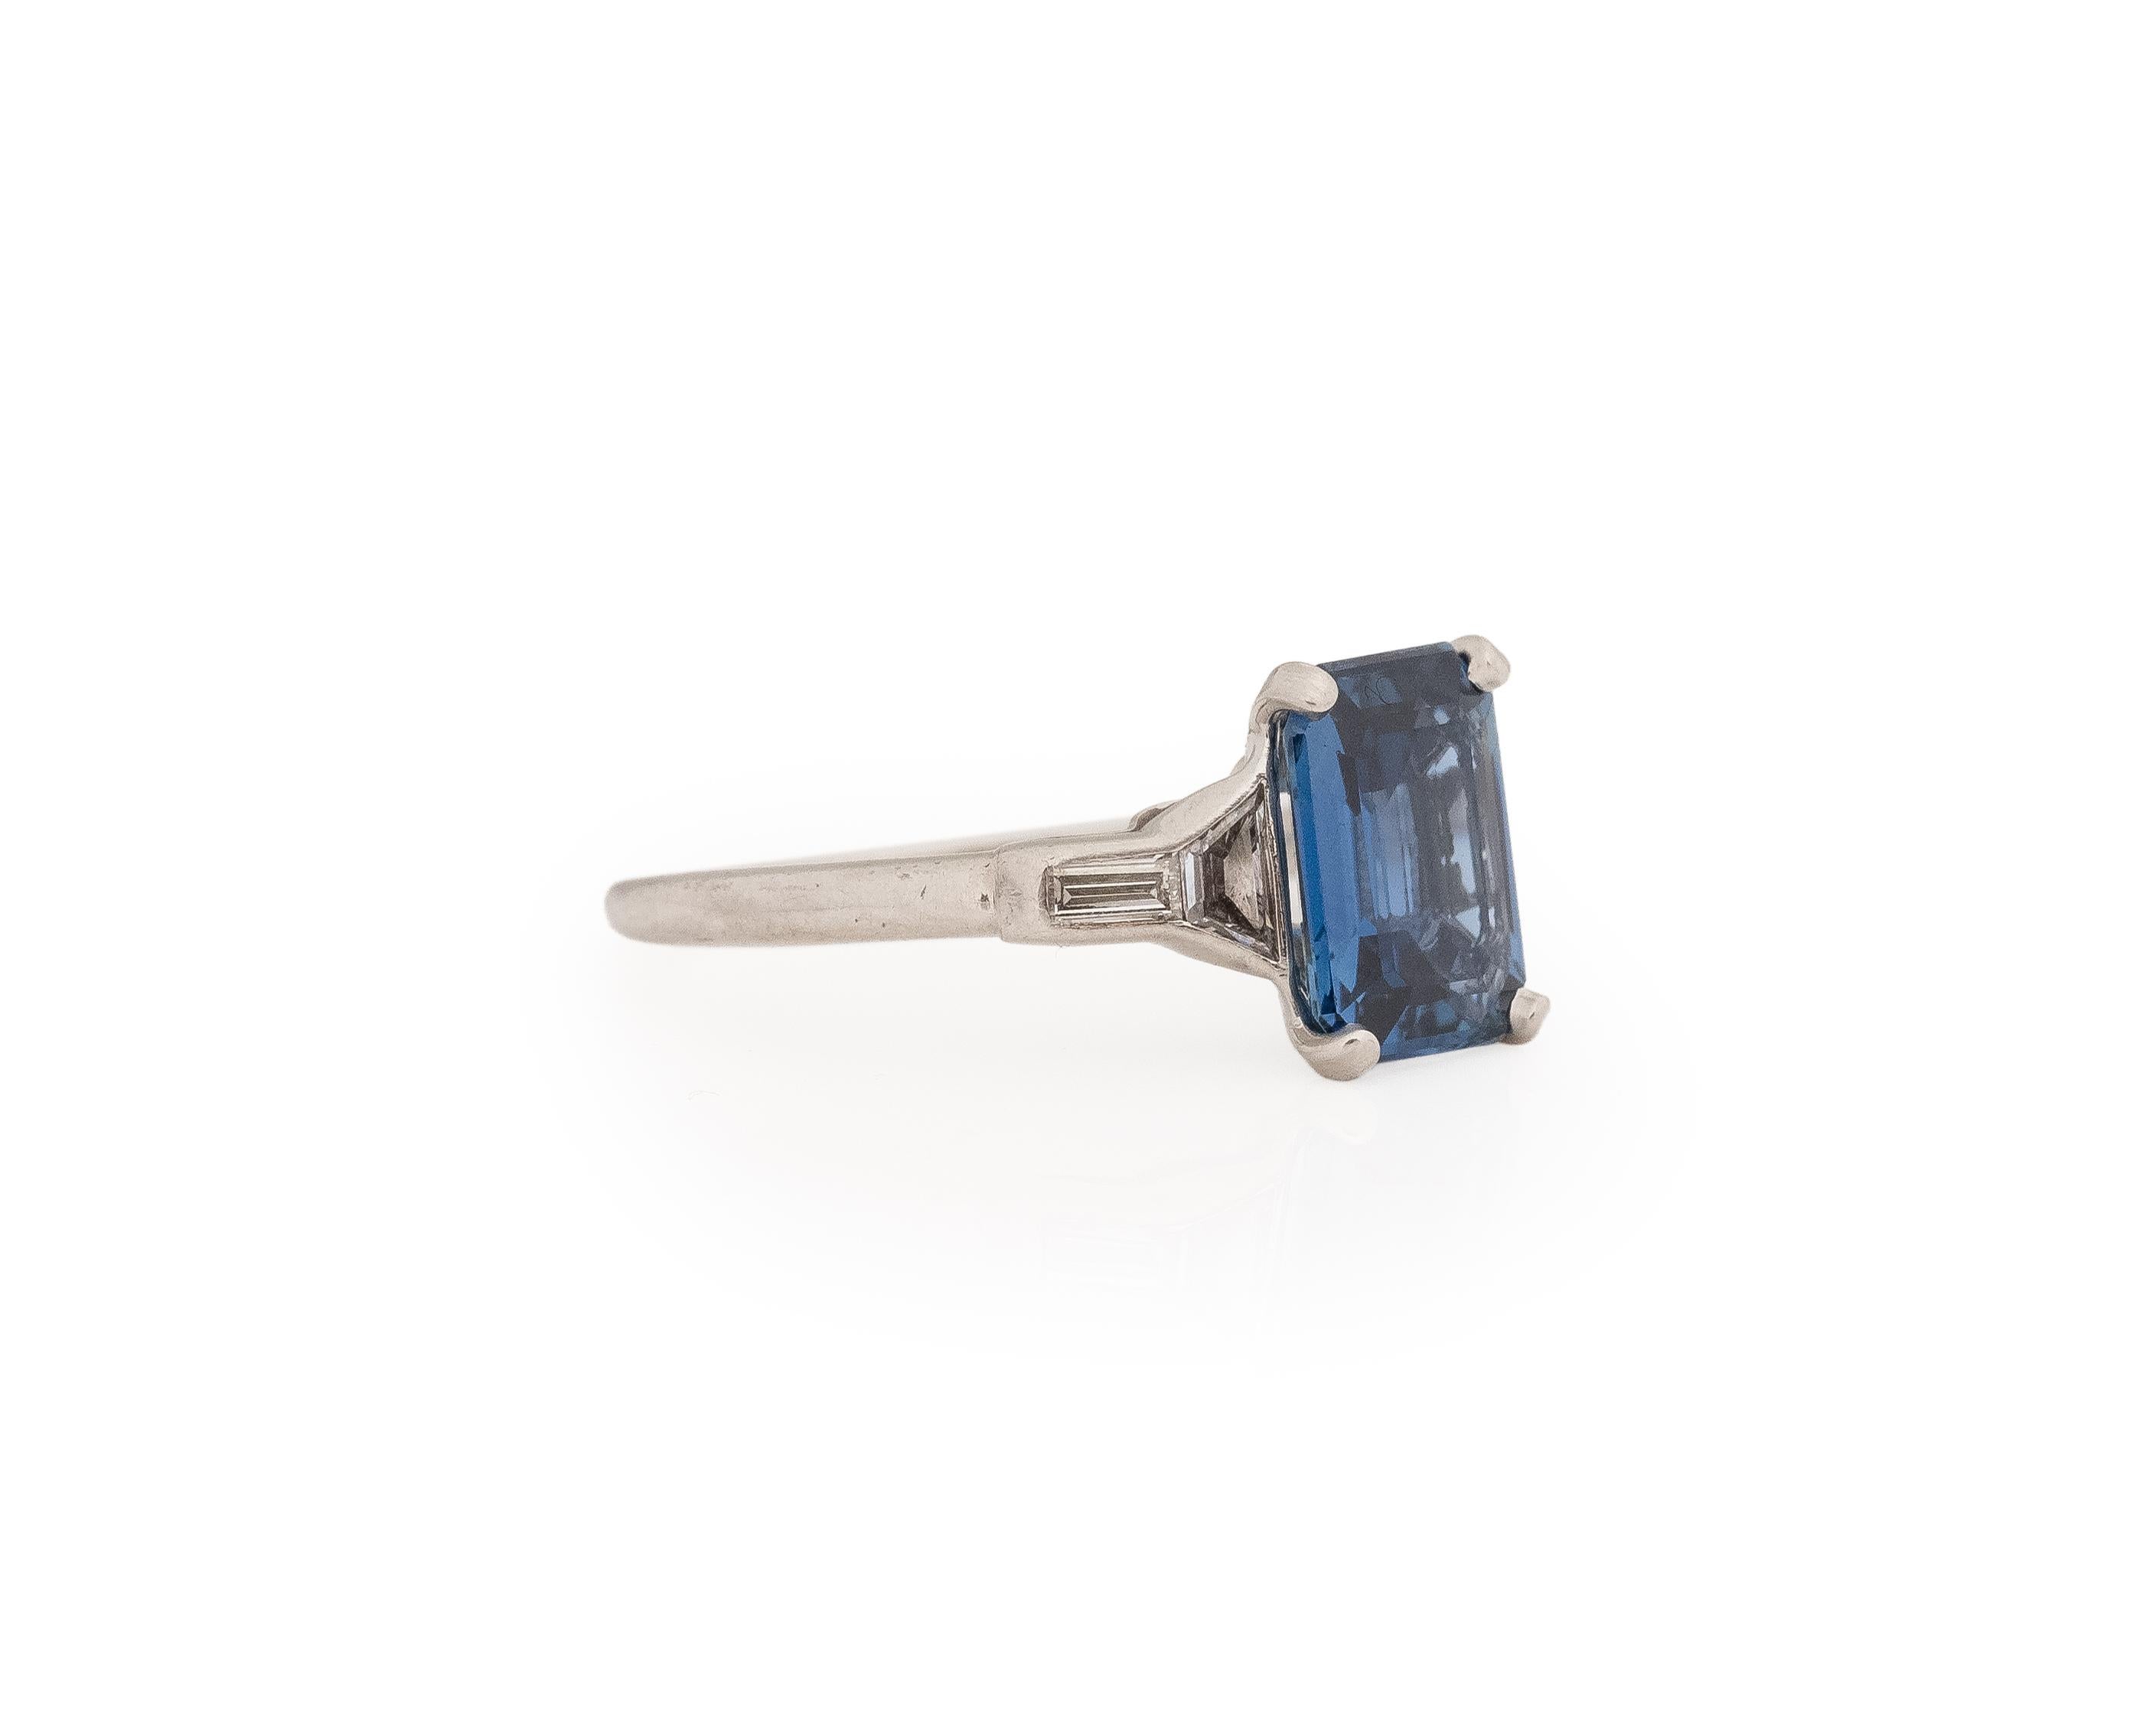 Year: 1920s

Item Details:
Ring Size: 6.75
Metal Type: Platinum [Hallmarked, and Tested]
Weight: 3.5 grams

Sapphire Details:

GIA Report#:5171464439
Weight: 2.32ct total weight
Cut: Octagonal Step Cut
Color: Blue (Unheated, untreated)
Type: